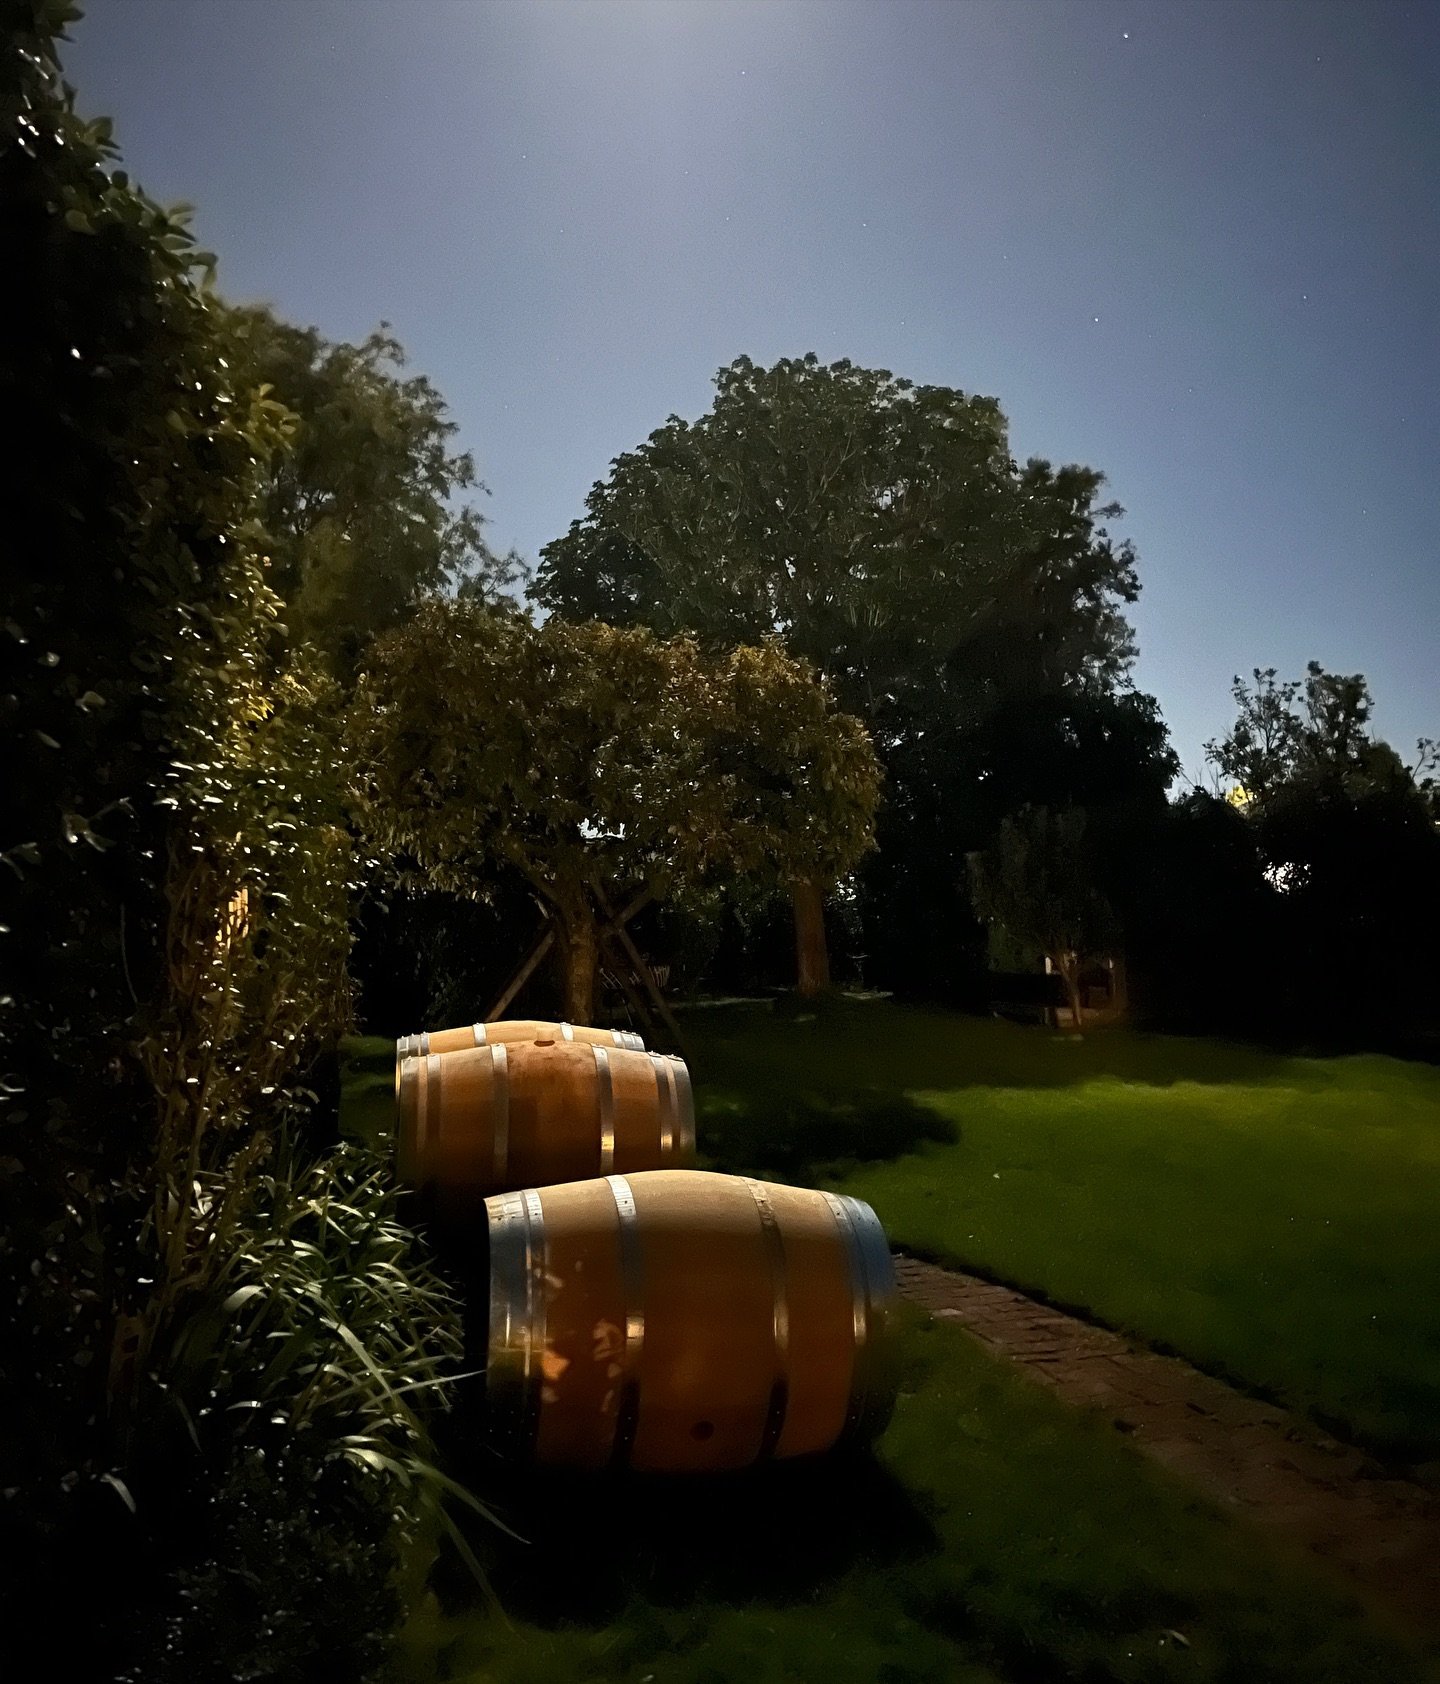 Full moon last night in the garden. 

Inside the garage, Cabernet, Syrah and Sangiovese fermenting away beautifully. 

Outside these Saury barrels wait patiently for pressing day. 

#chateaugarage #chateaugaragenz #hawkesbaywine #nzwine